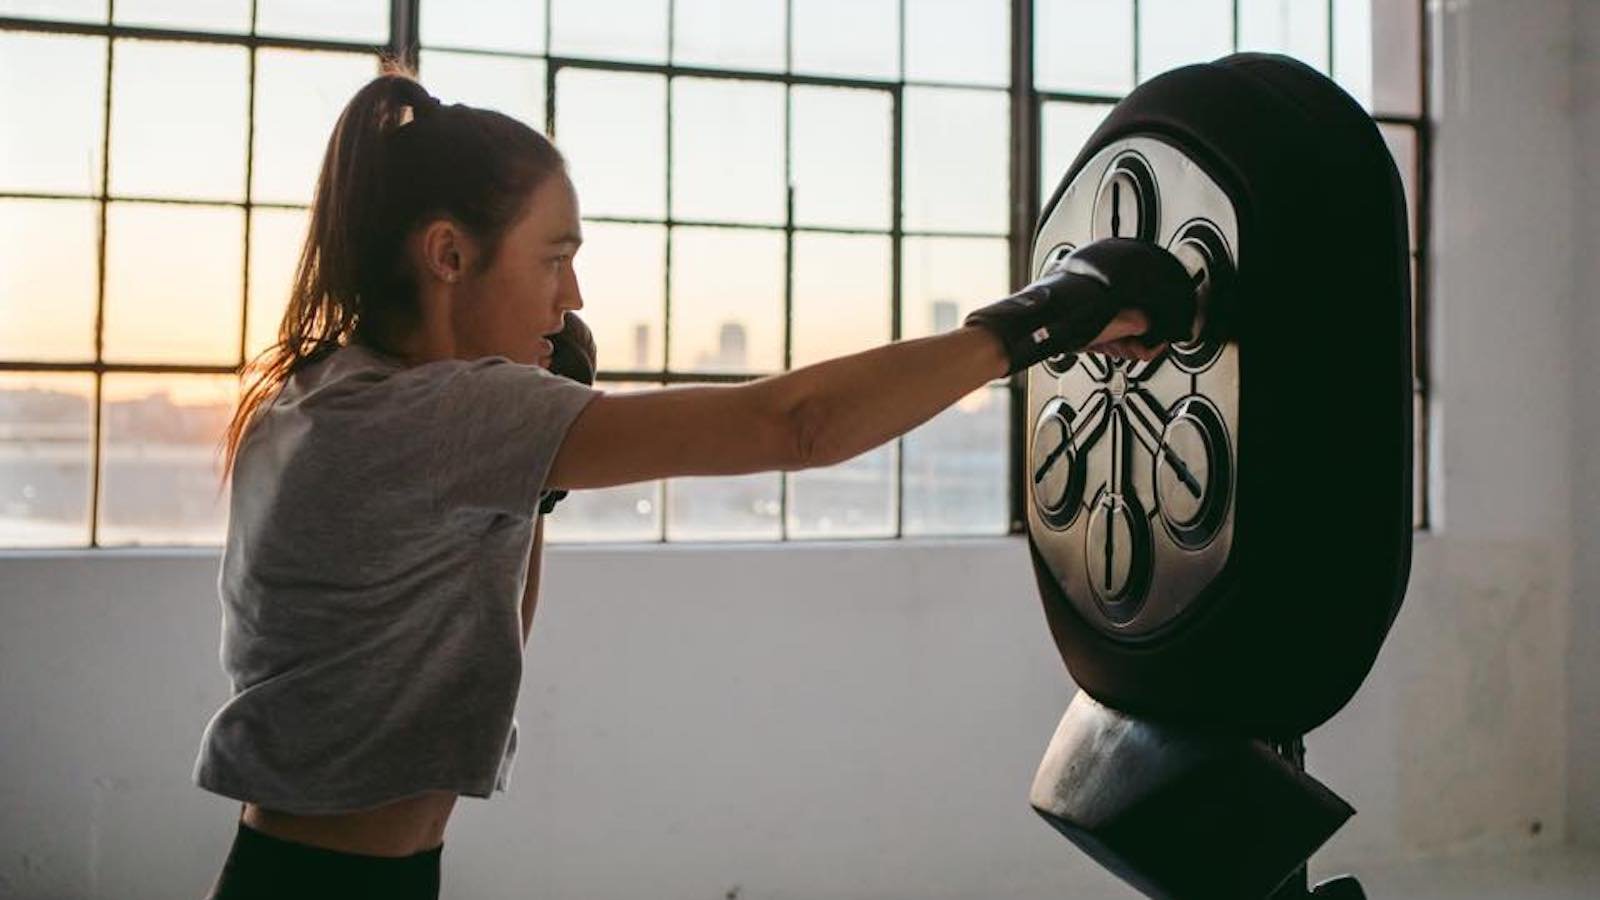 This Liteboxer boxing machine offers workouts from trainers